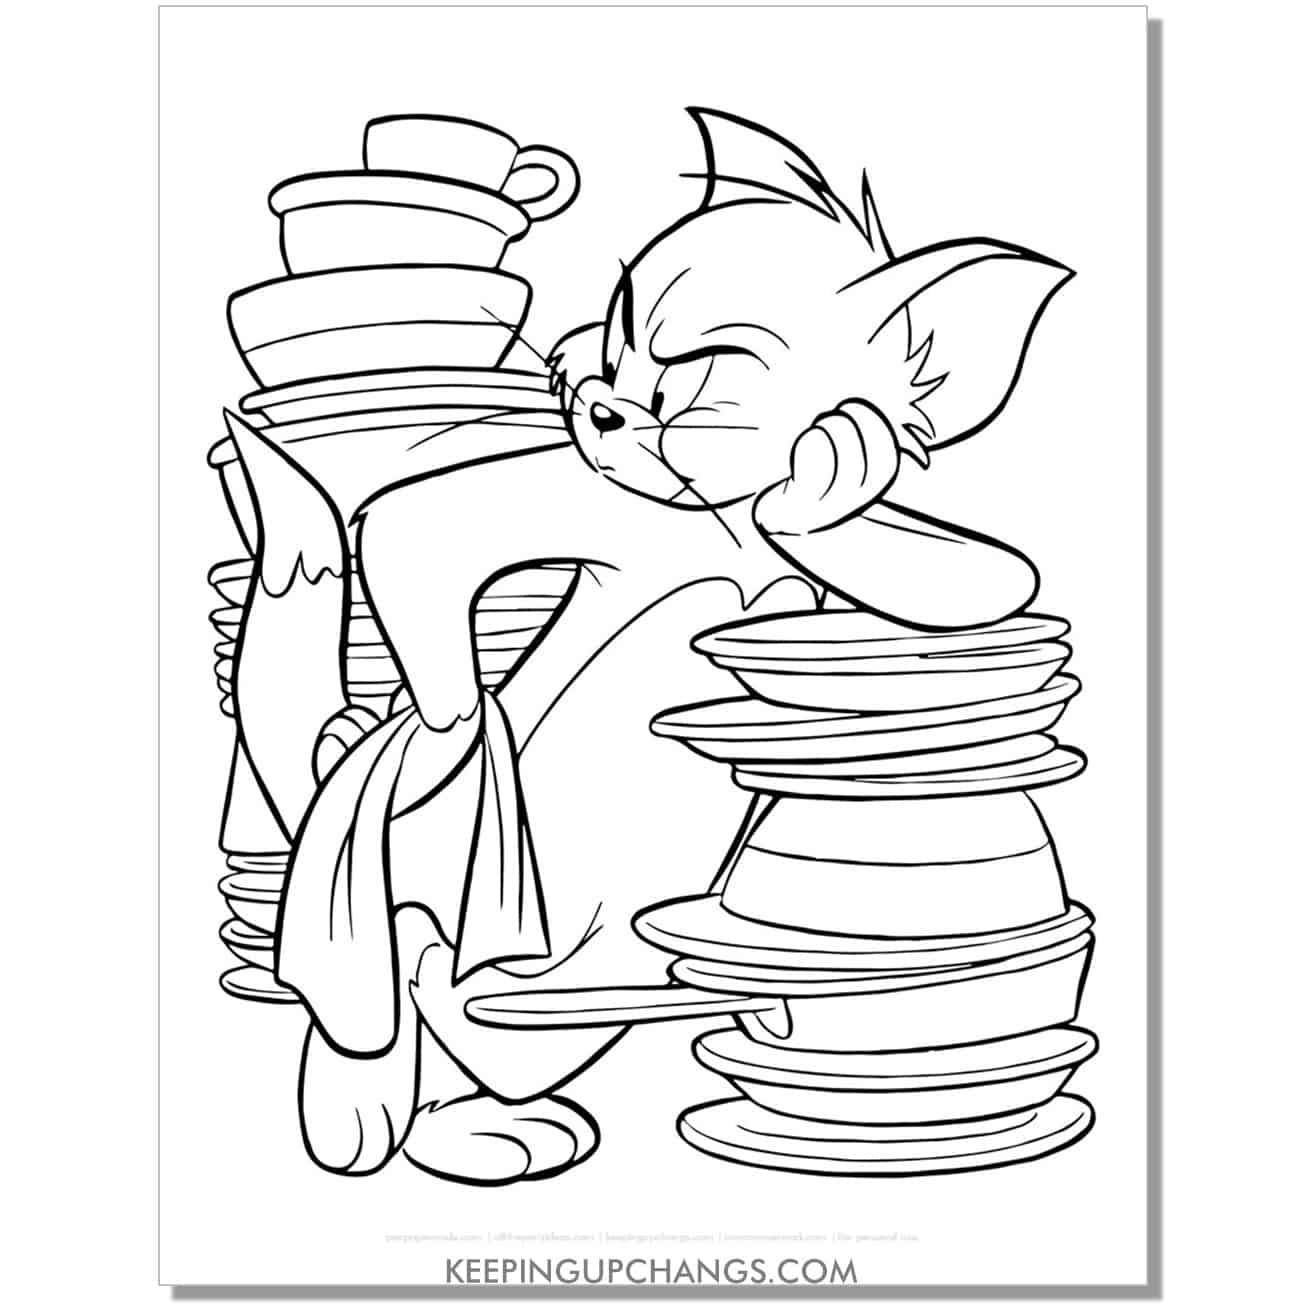 free tom with lots of dishes coloring page.